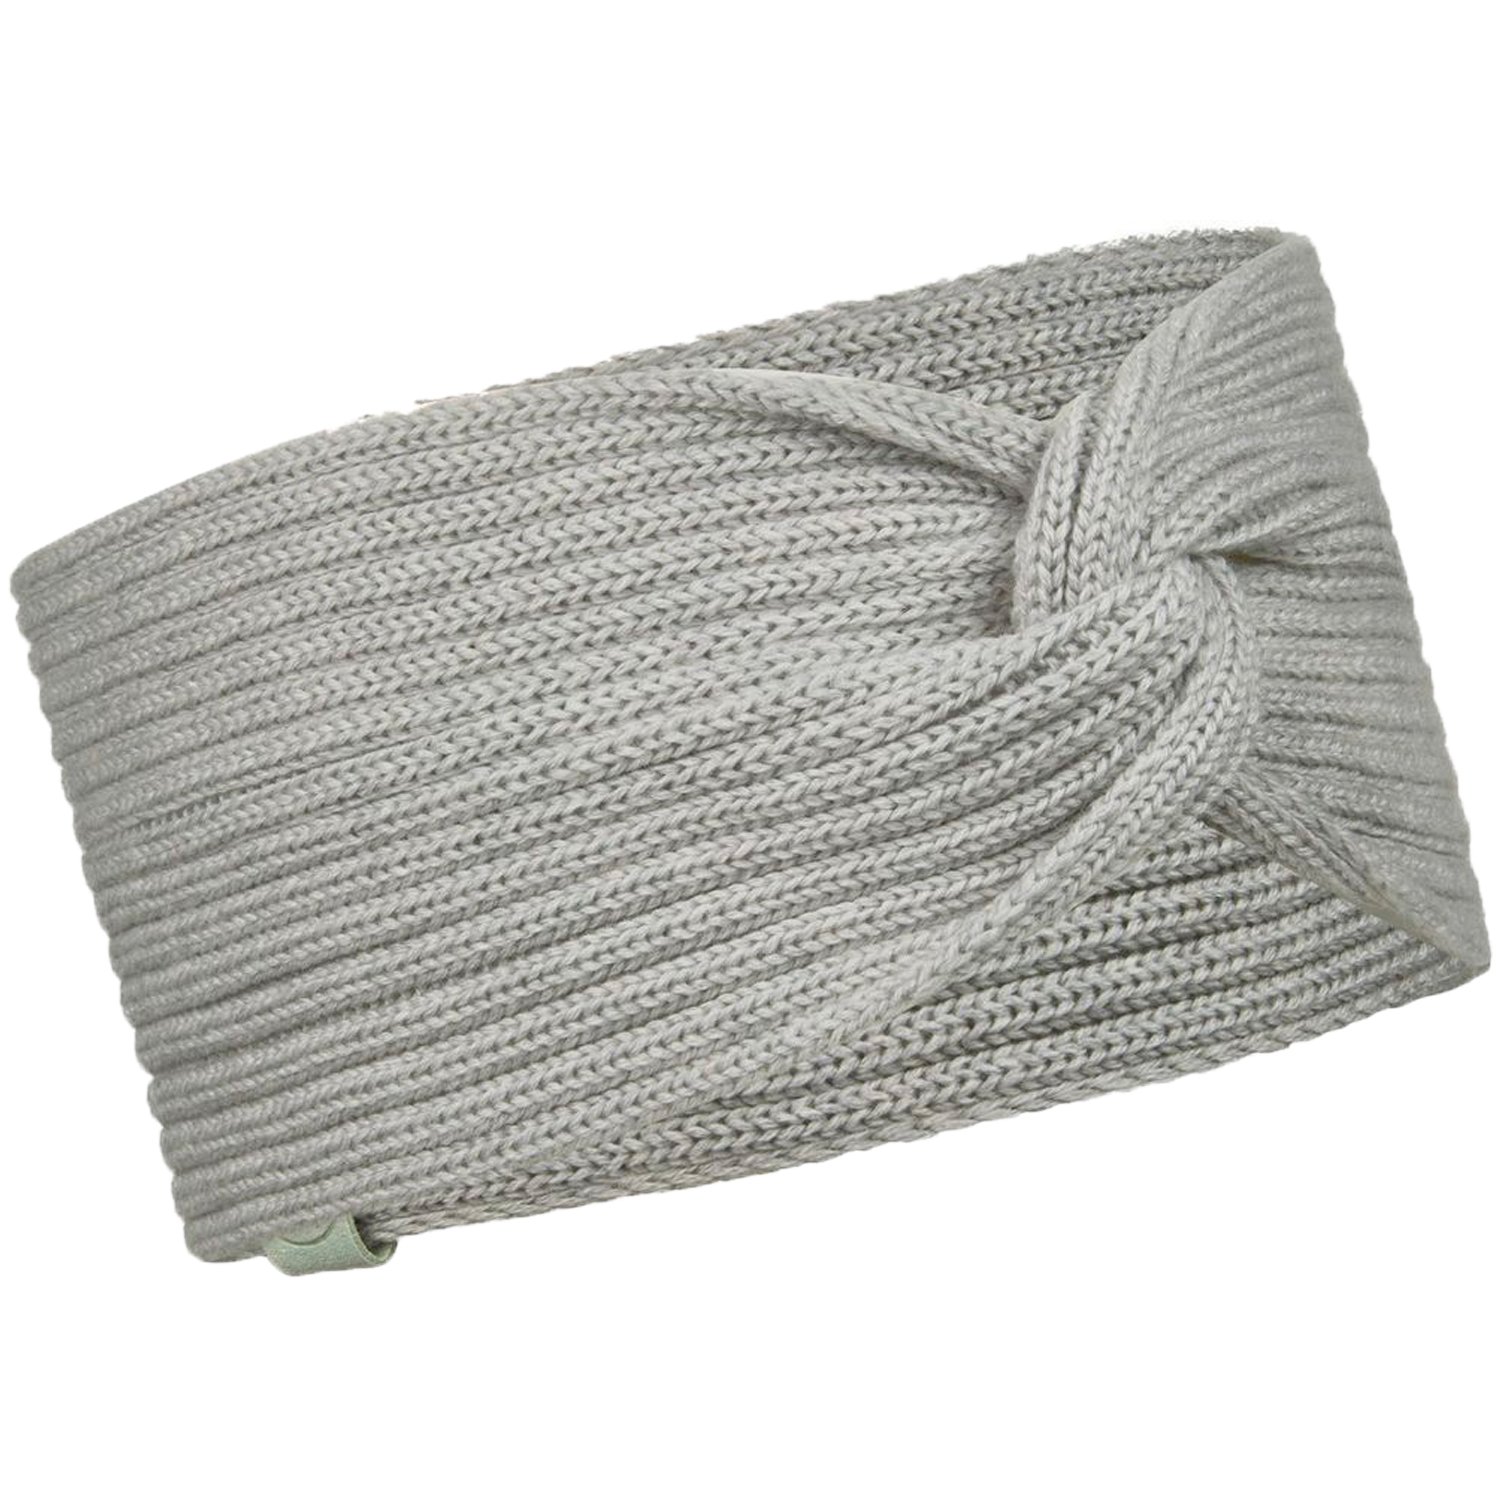 Повязка Buff Knitted Hat Norval Light Grey, женский, 126459.933.10.00 шапка buff knitted hat norval pansy us one size 124242 601 10 00